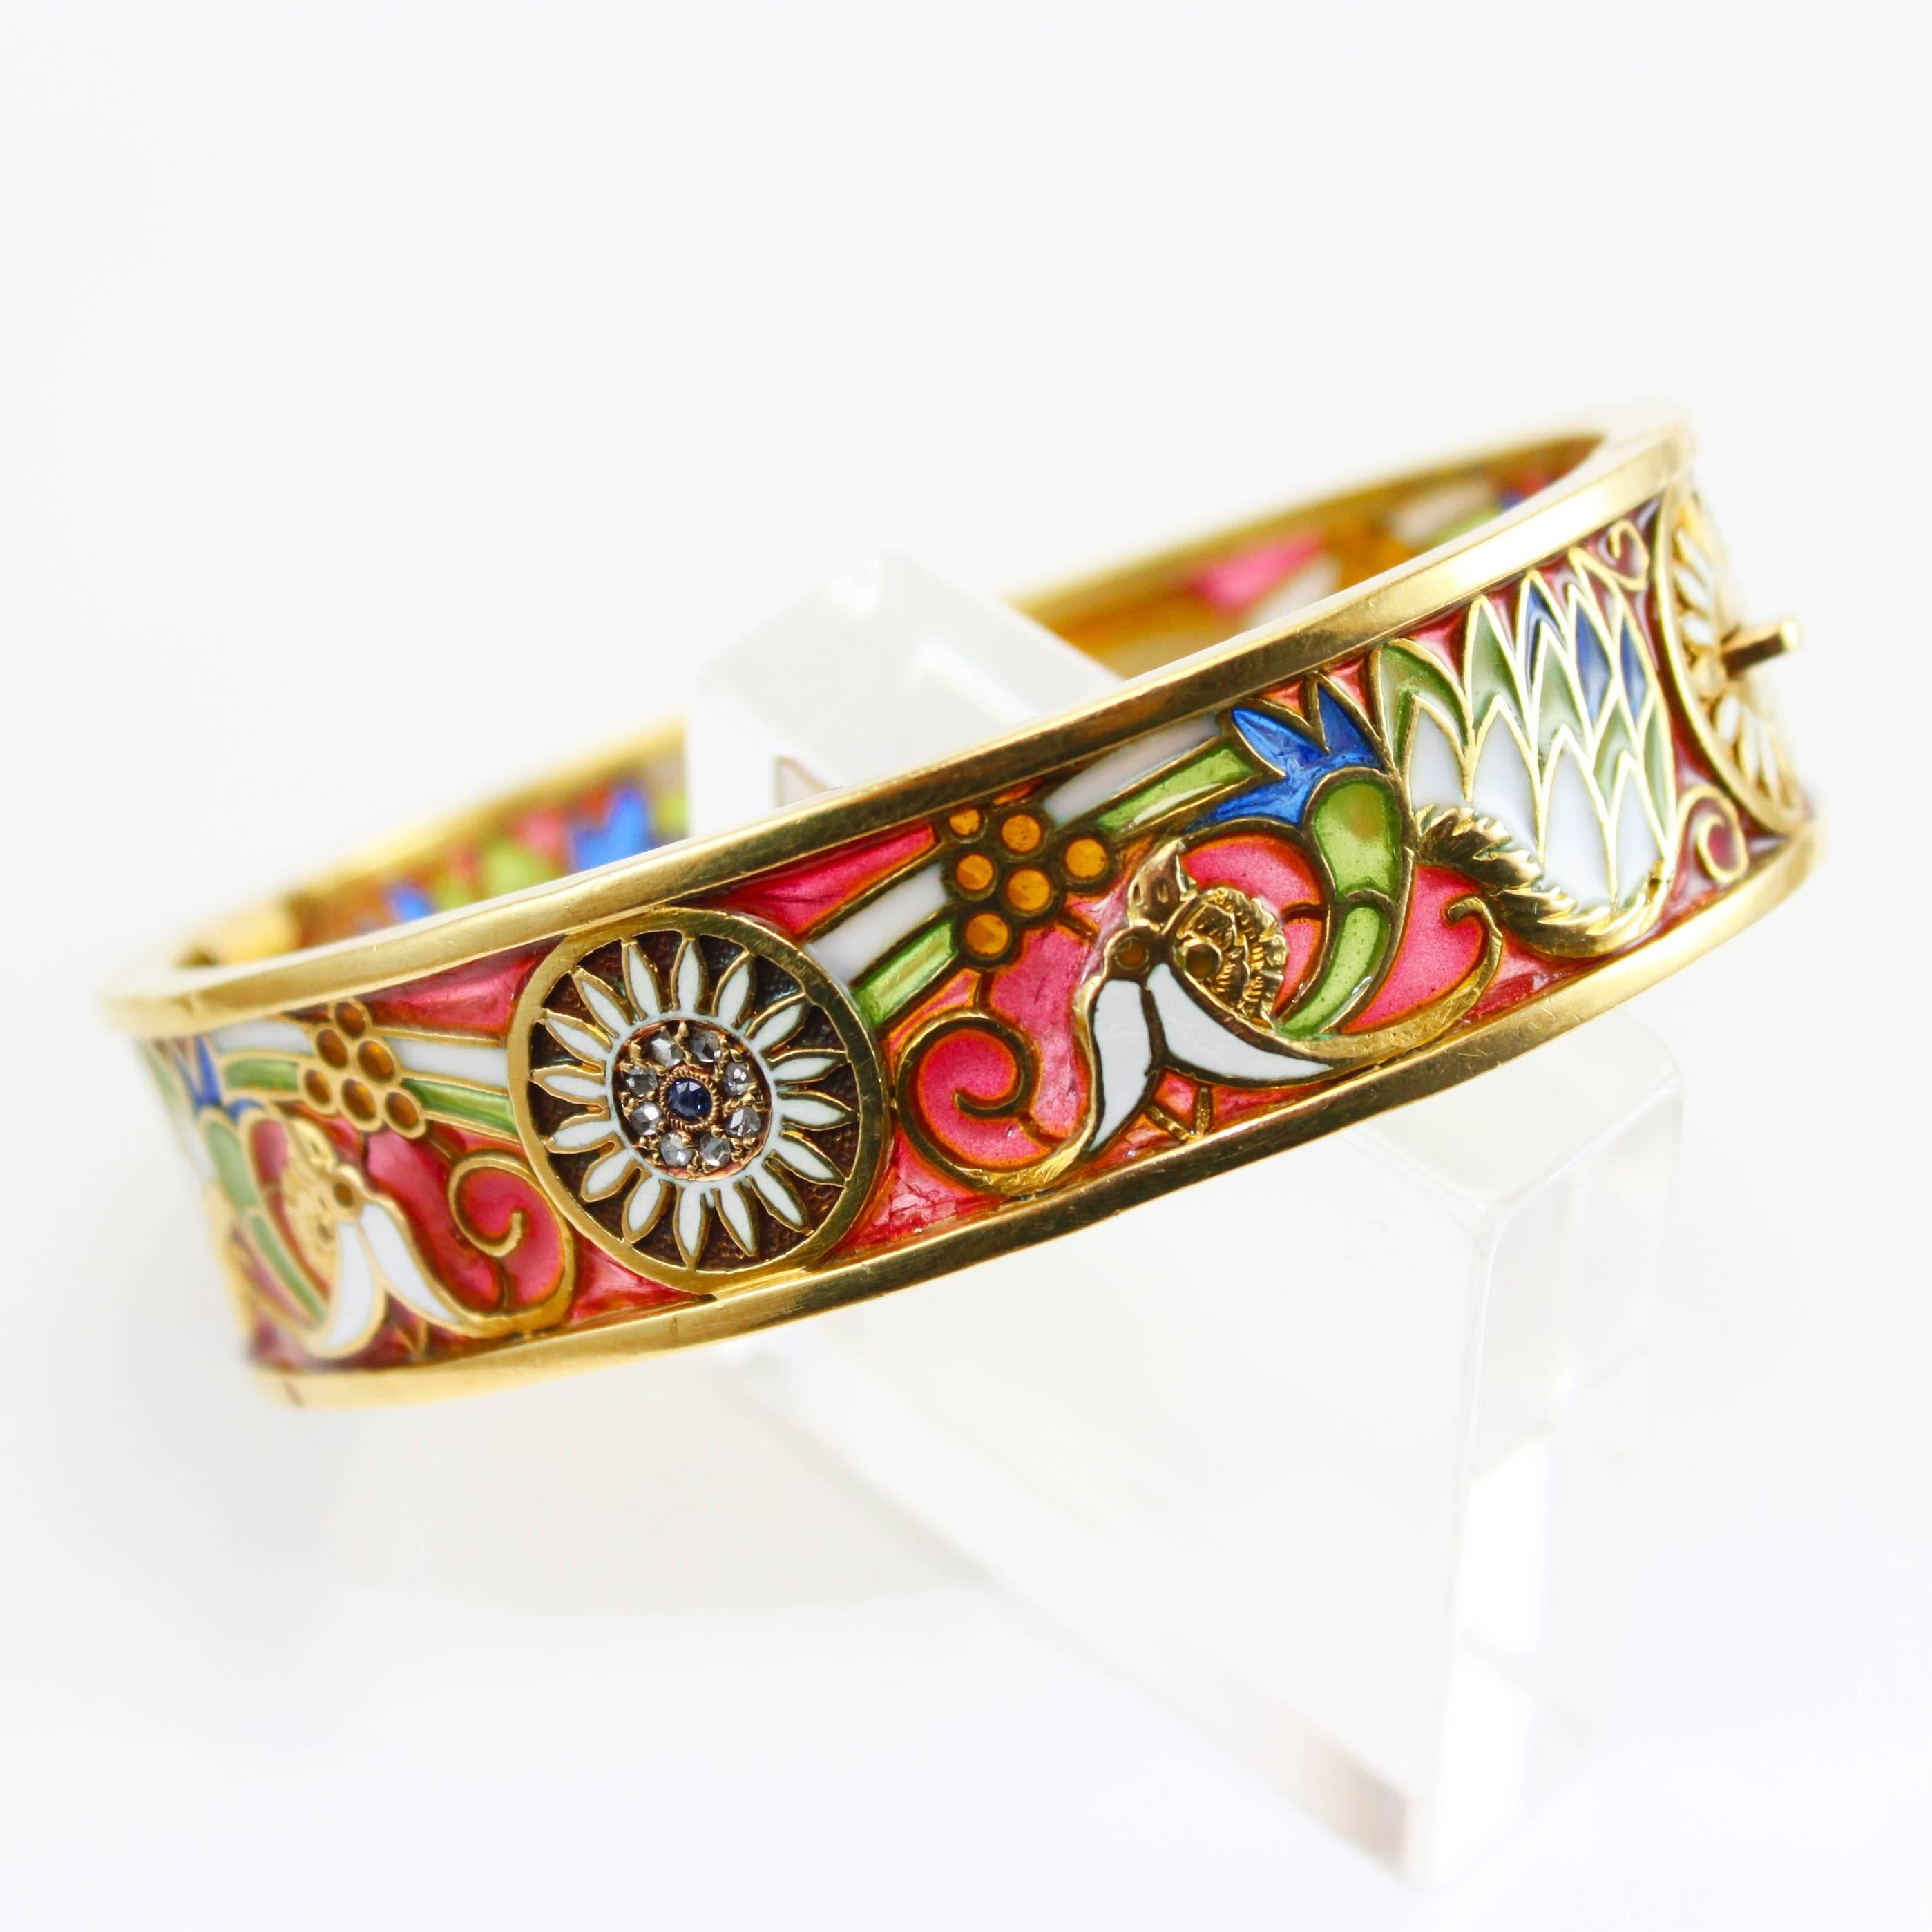 An Art Nouveau Plique a Jour Enamel Bangle, by Masriera y Carreras, ca. 1915

A beautiful and rare Art Nouveau bangle by the renowned spanish maker Masriera y Carreras, whose signature plique a jour enamelling (also known as window enamelling) is